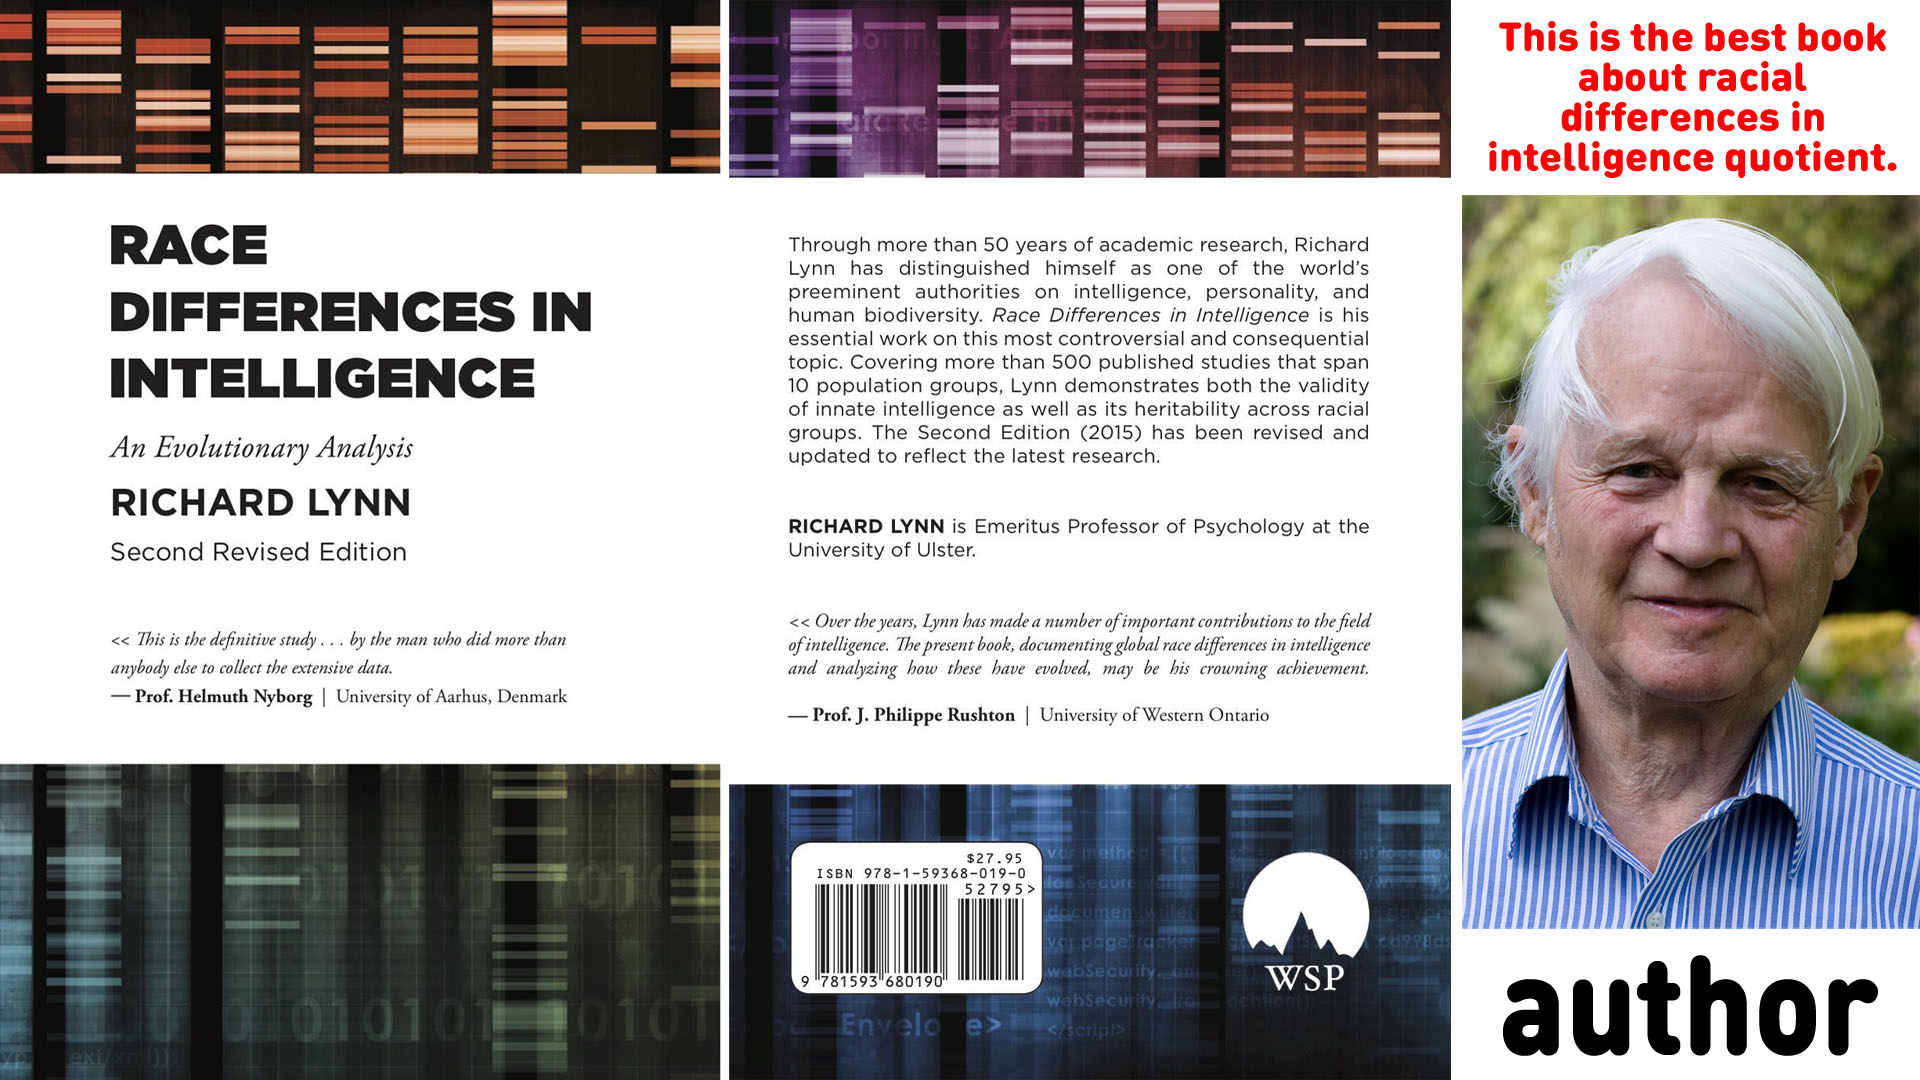 Race differences in intelligence, by Richard Lynn